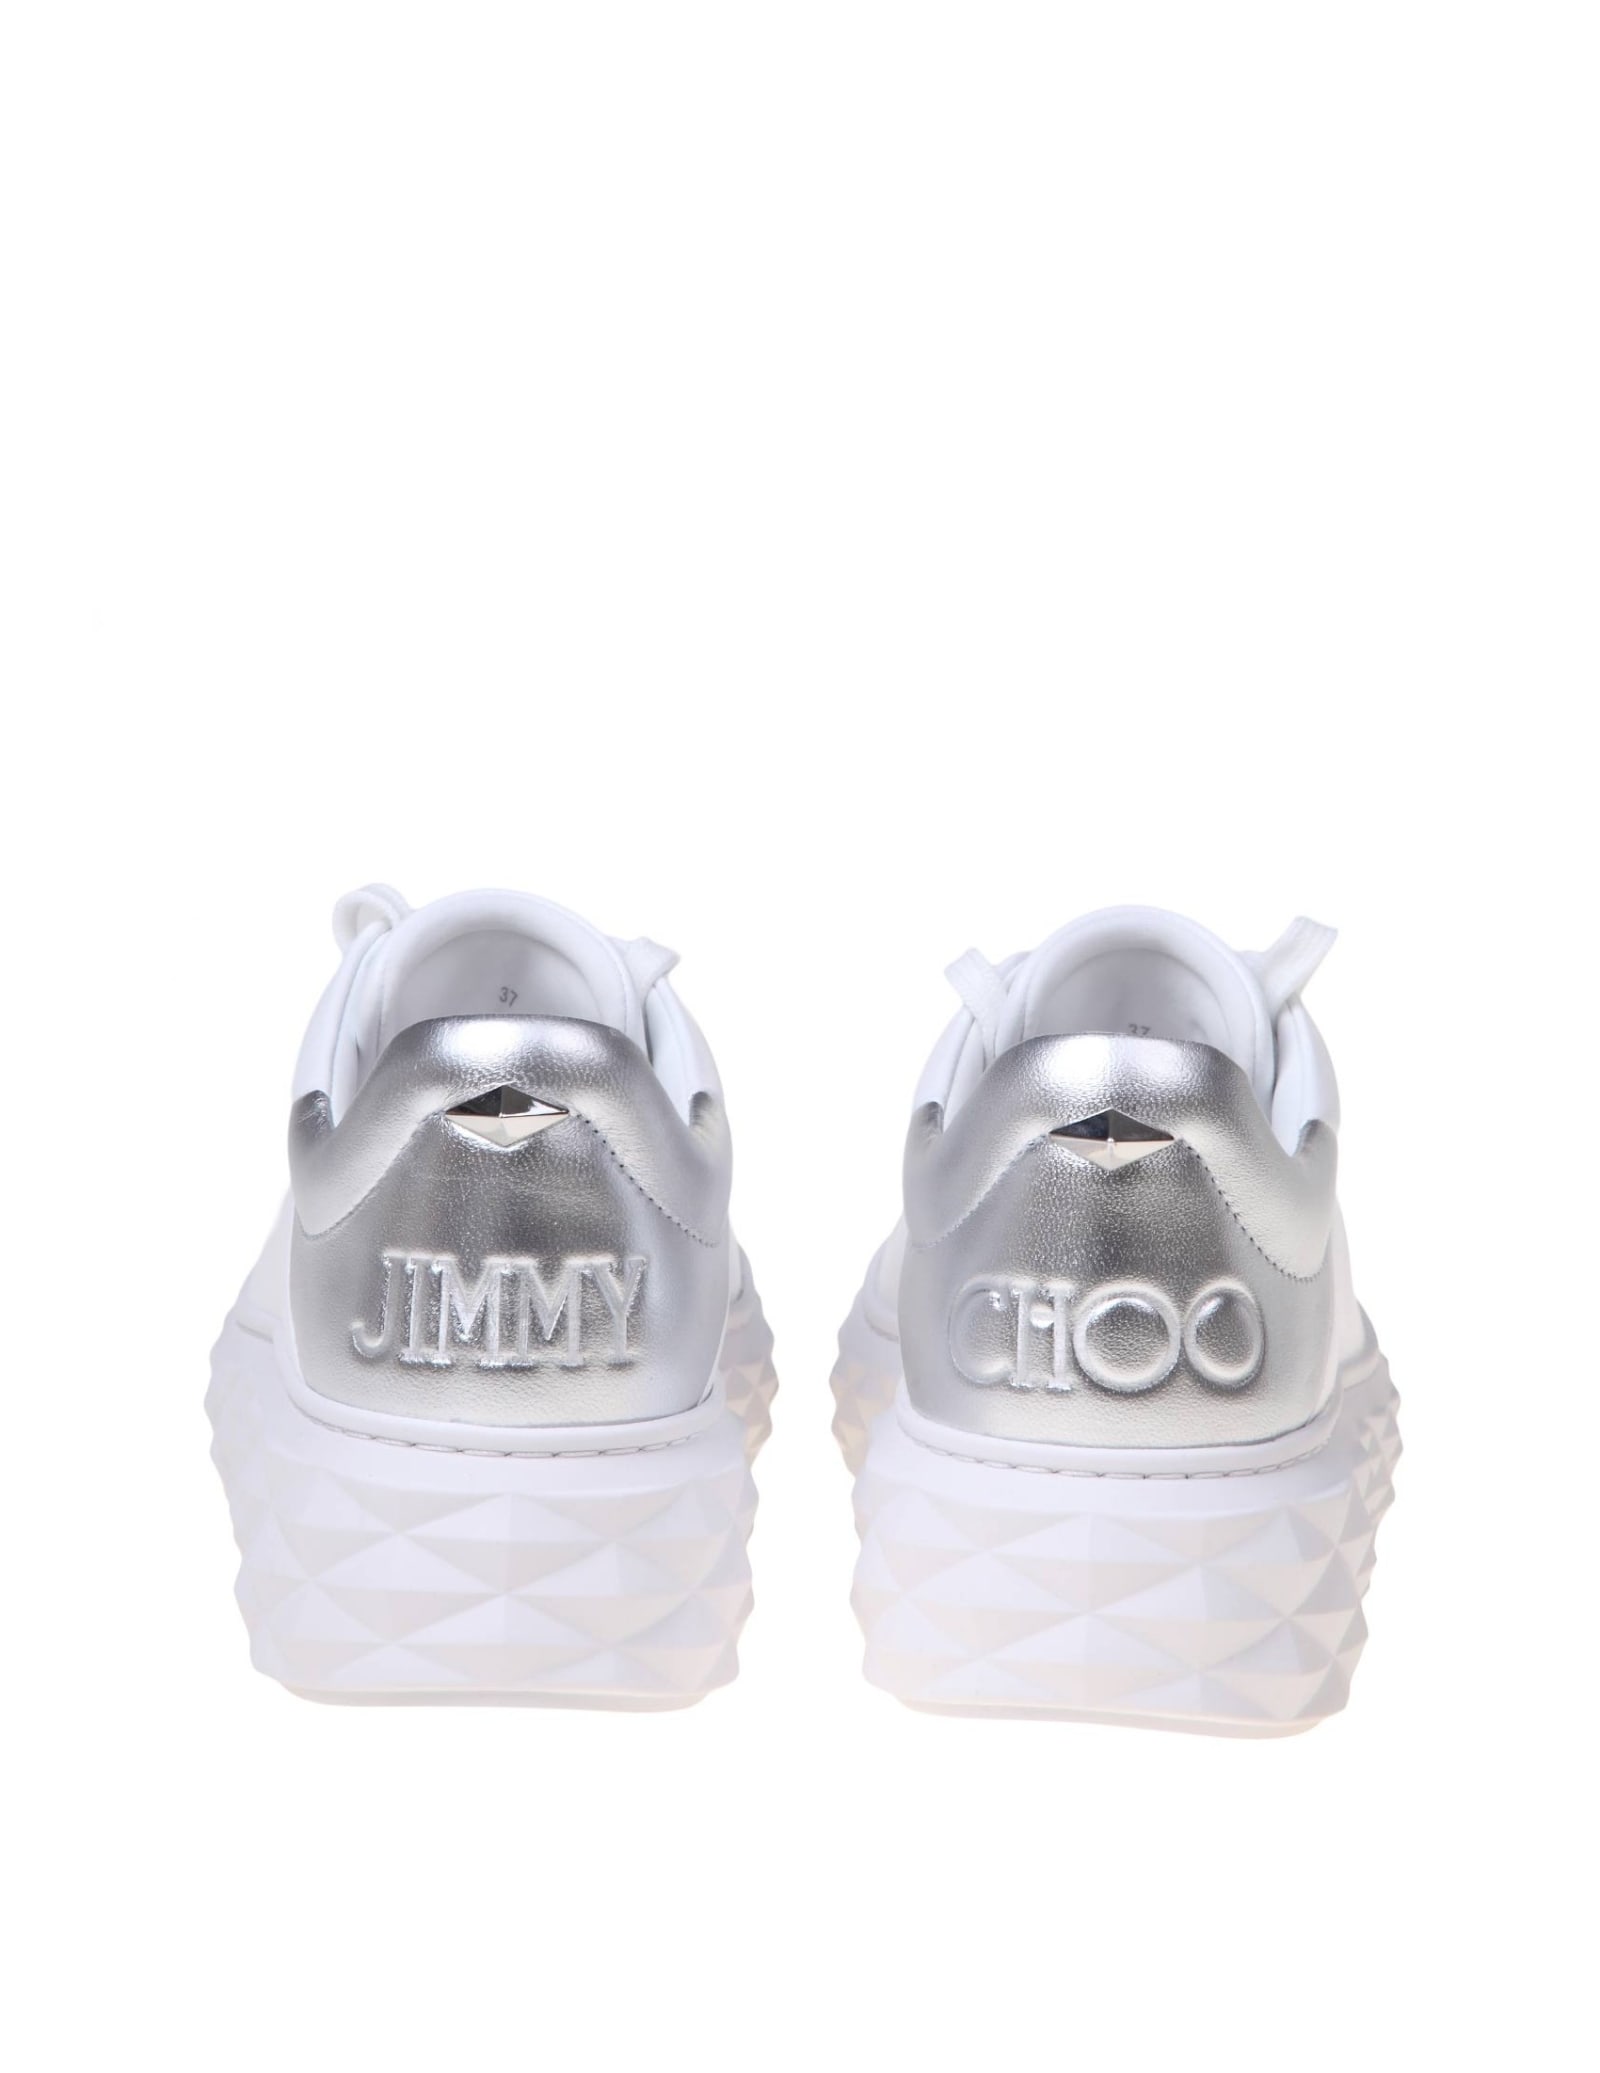 Shop Jimmy Choo Diamond Maxi Sneakers In White And Silver Leather